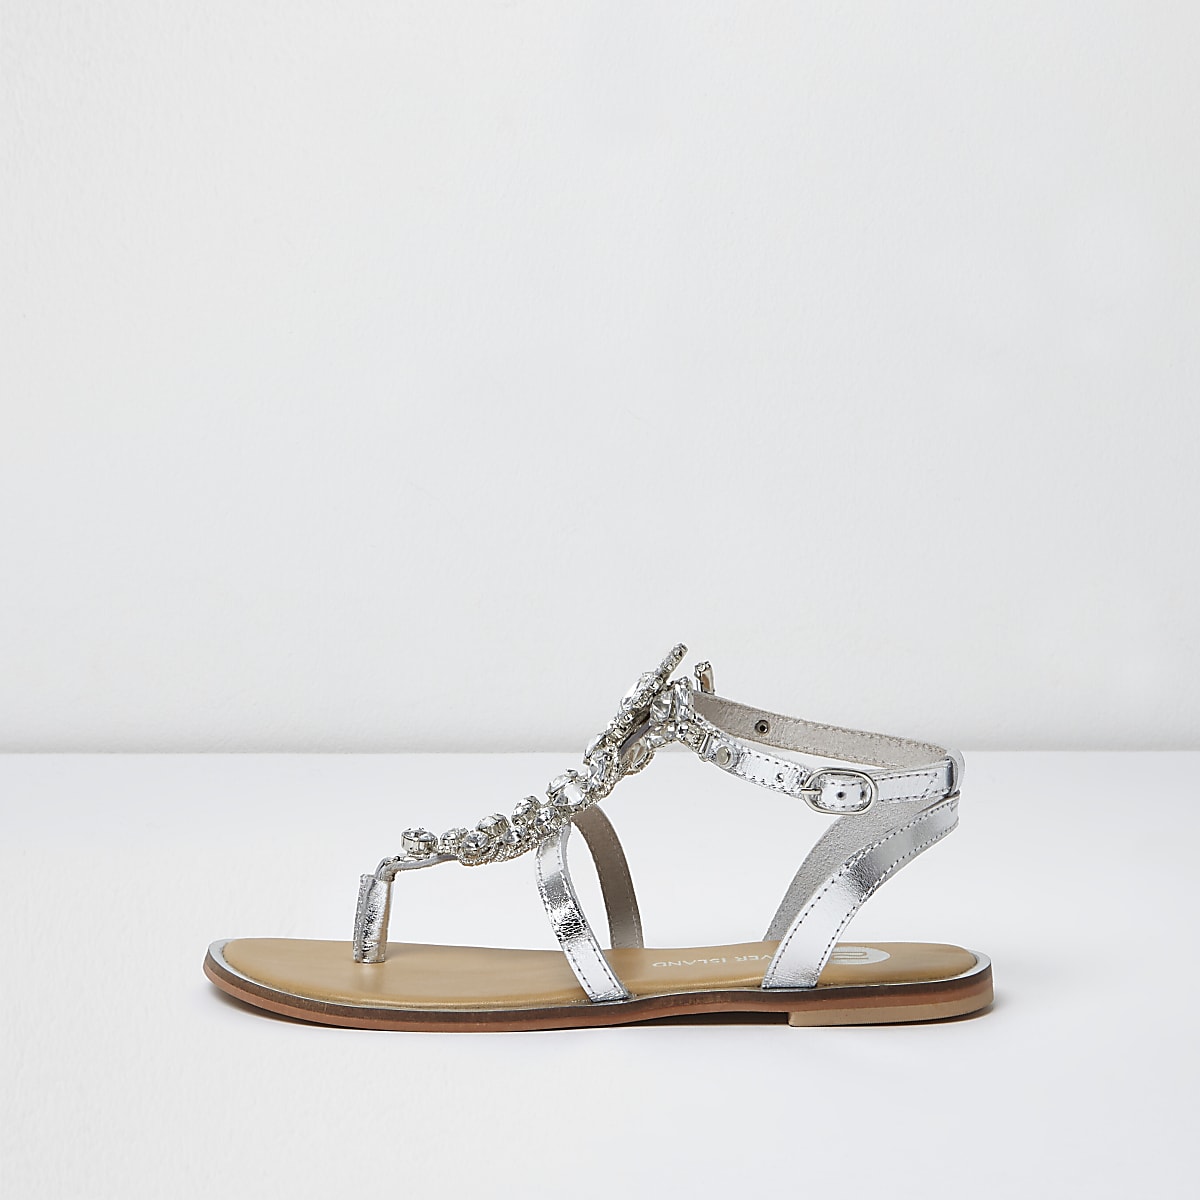 Silver metallic embellished sandals - Sandals - Shoes & Boots - women